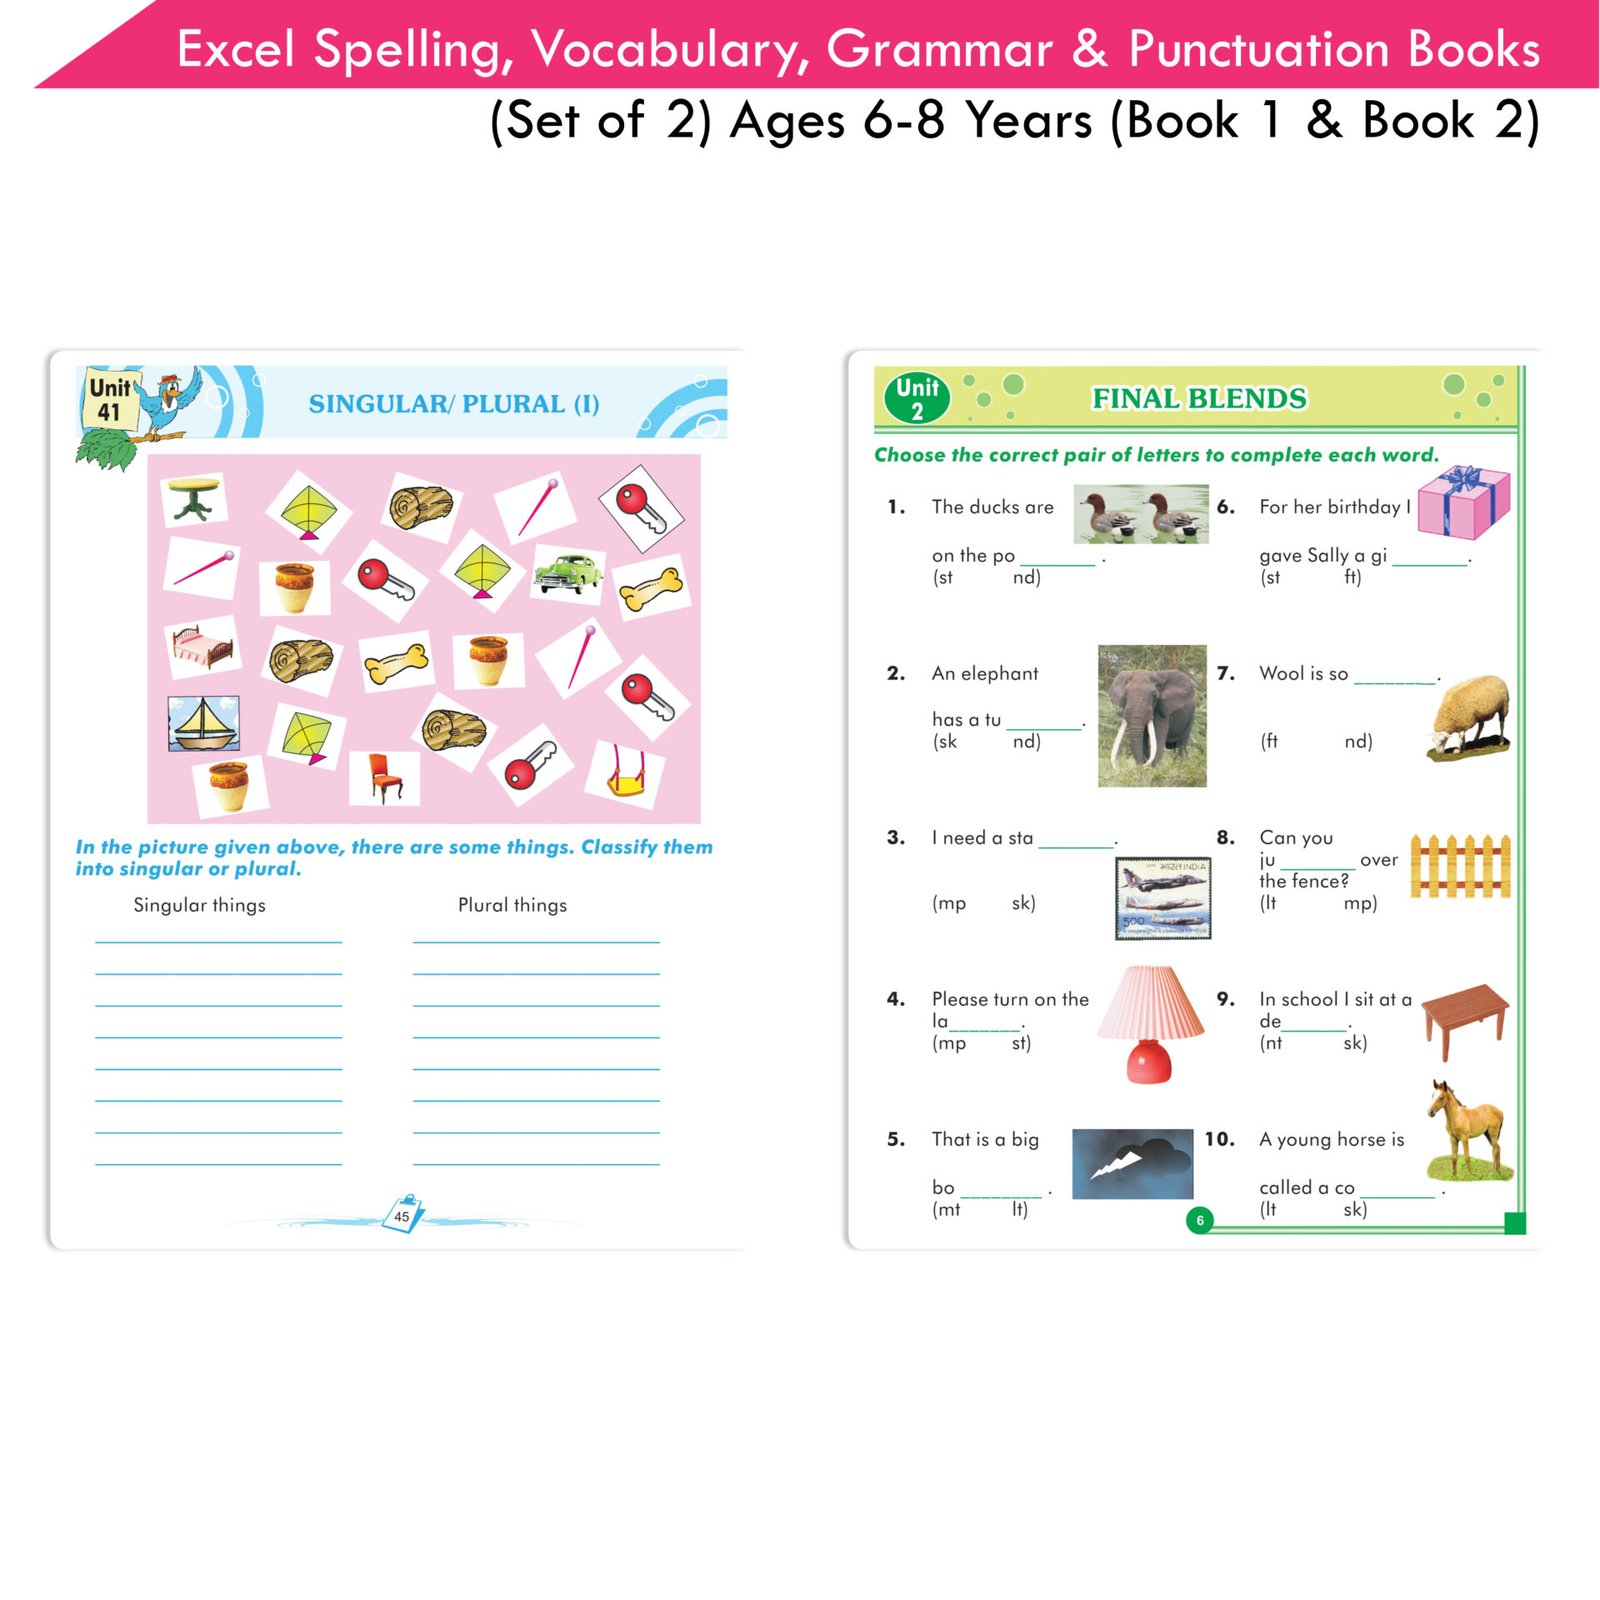 Excel Basic Skills Spelling Vocabulary Grammar and Punctuation Book Set Ages 6 8 Set of 2 7